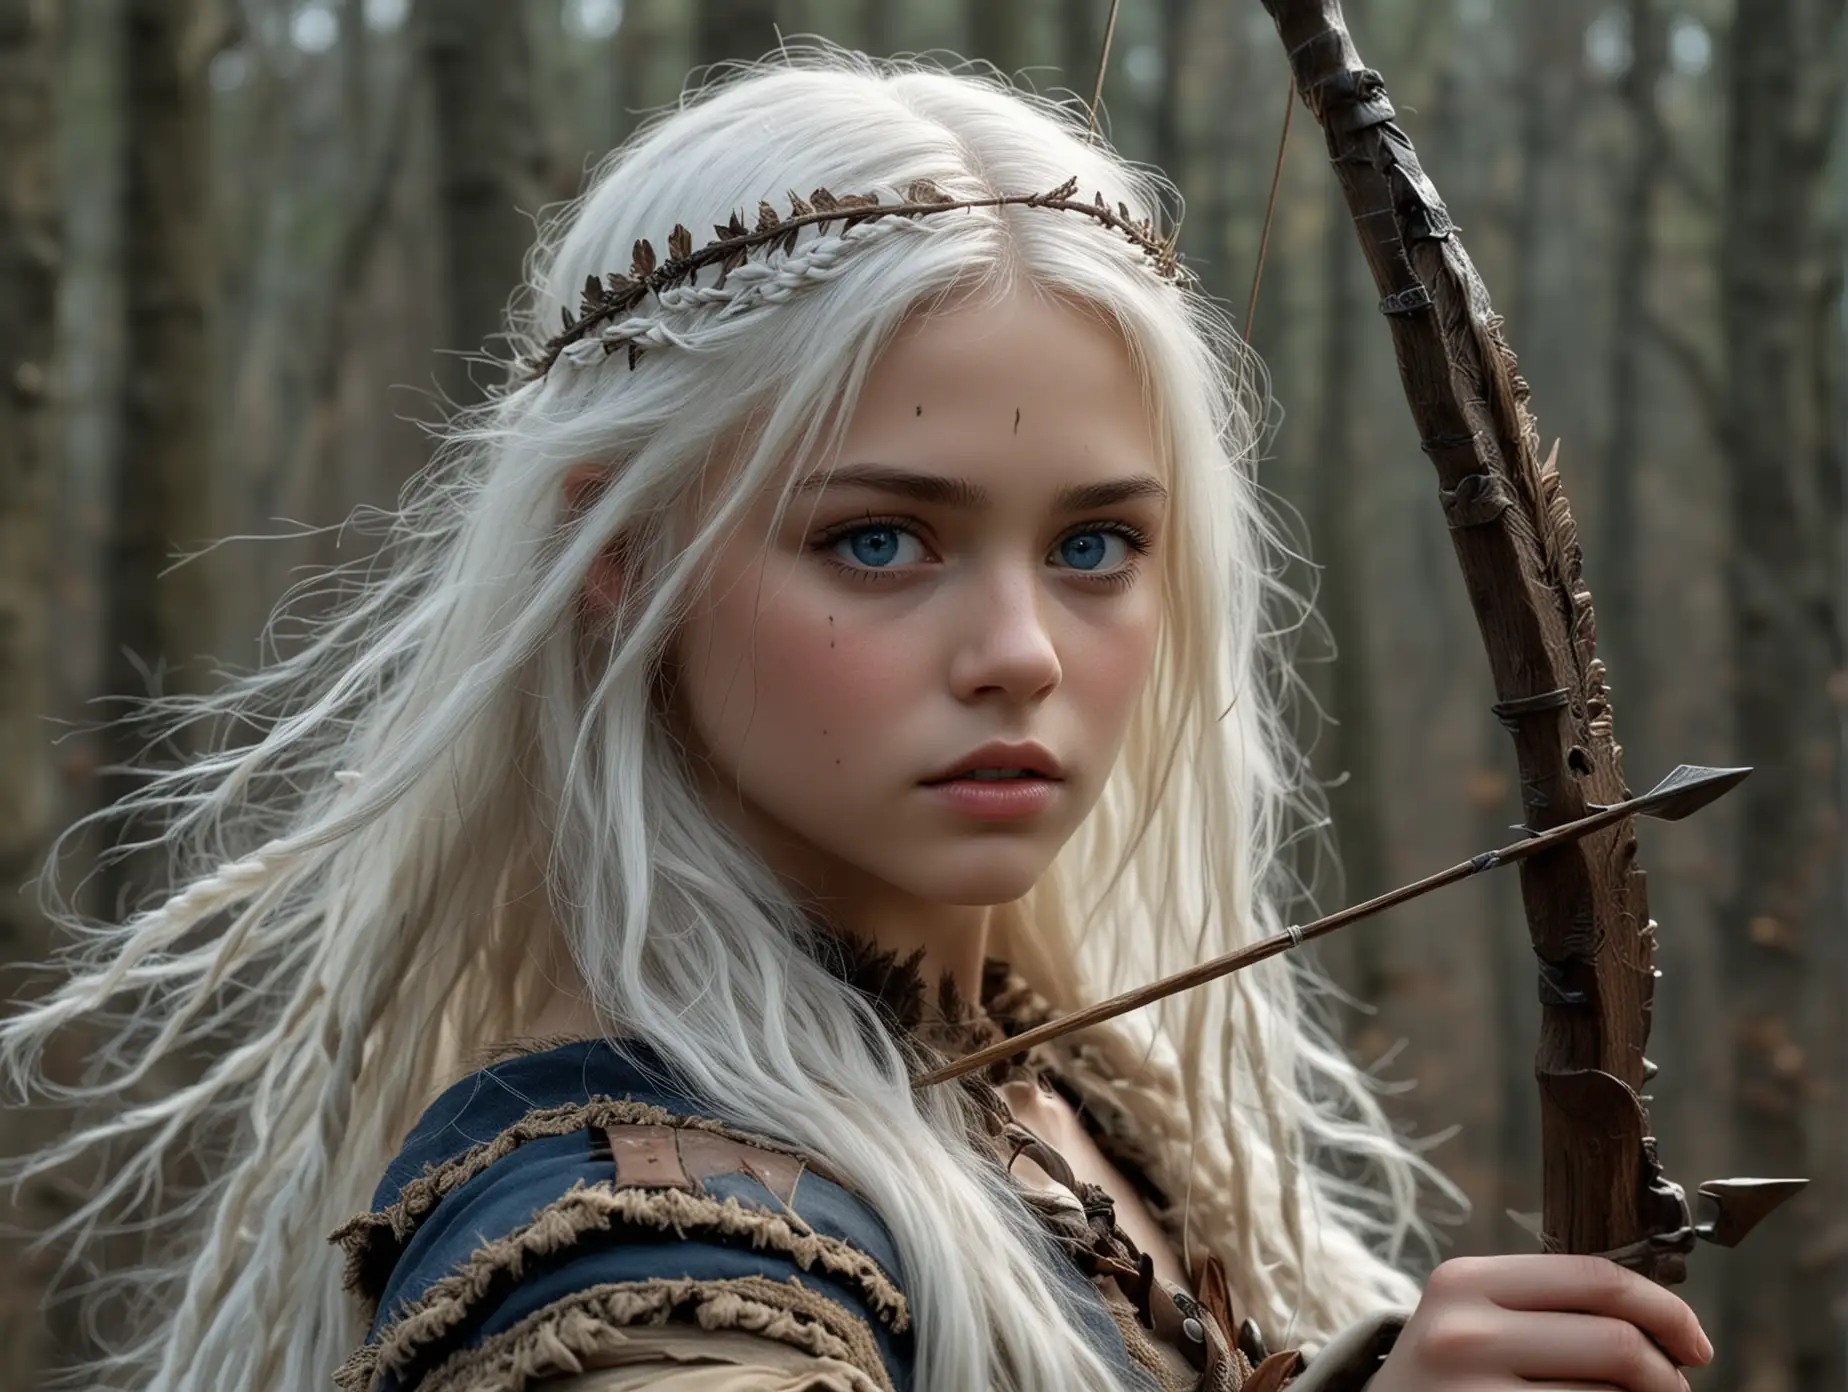 Primitive-Period-Young-Girl-Hunting-with-White-Hair-and-Blue-Eyes